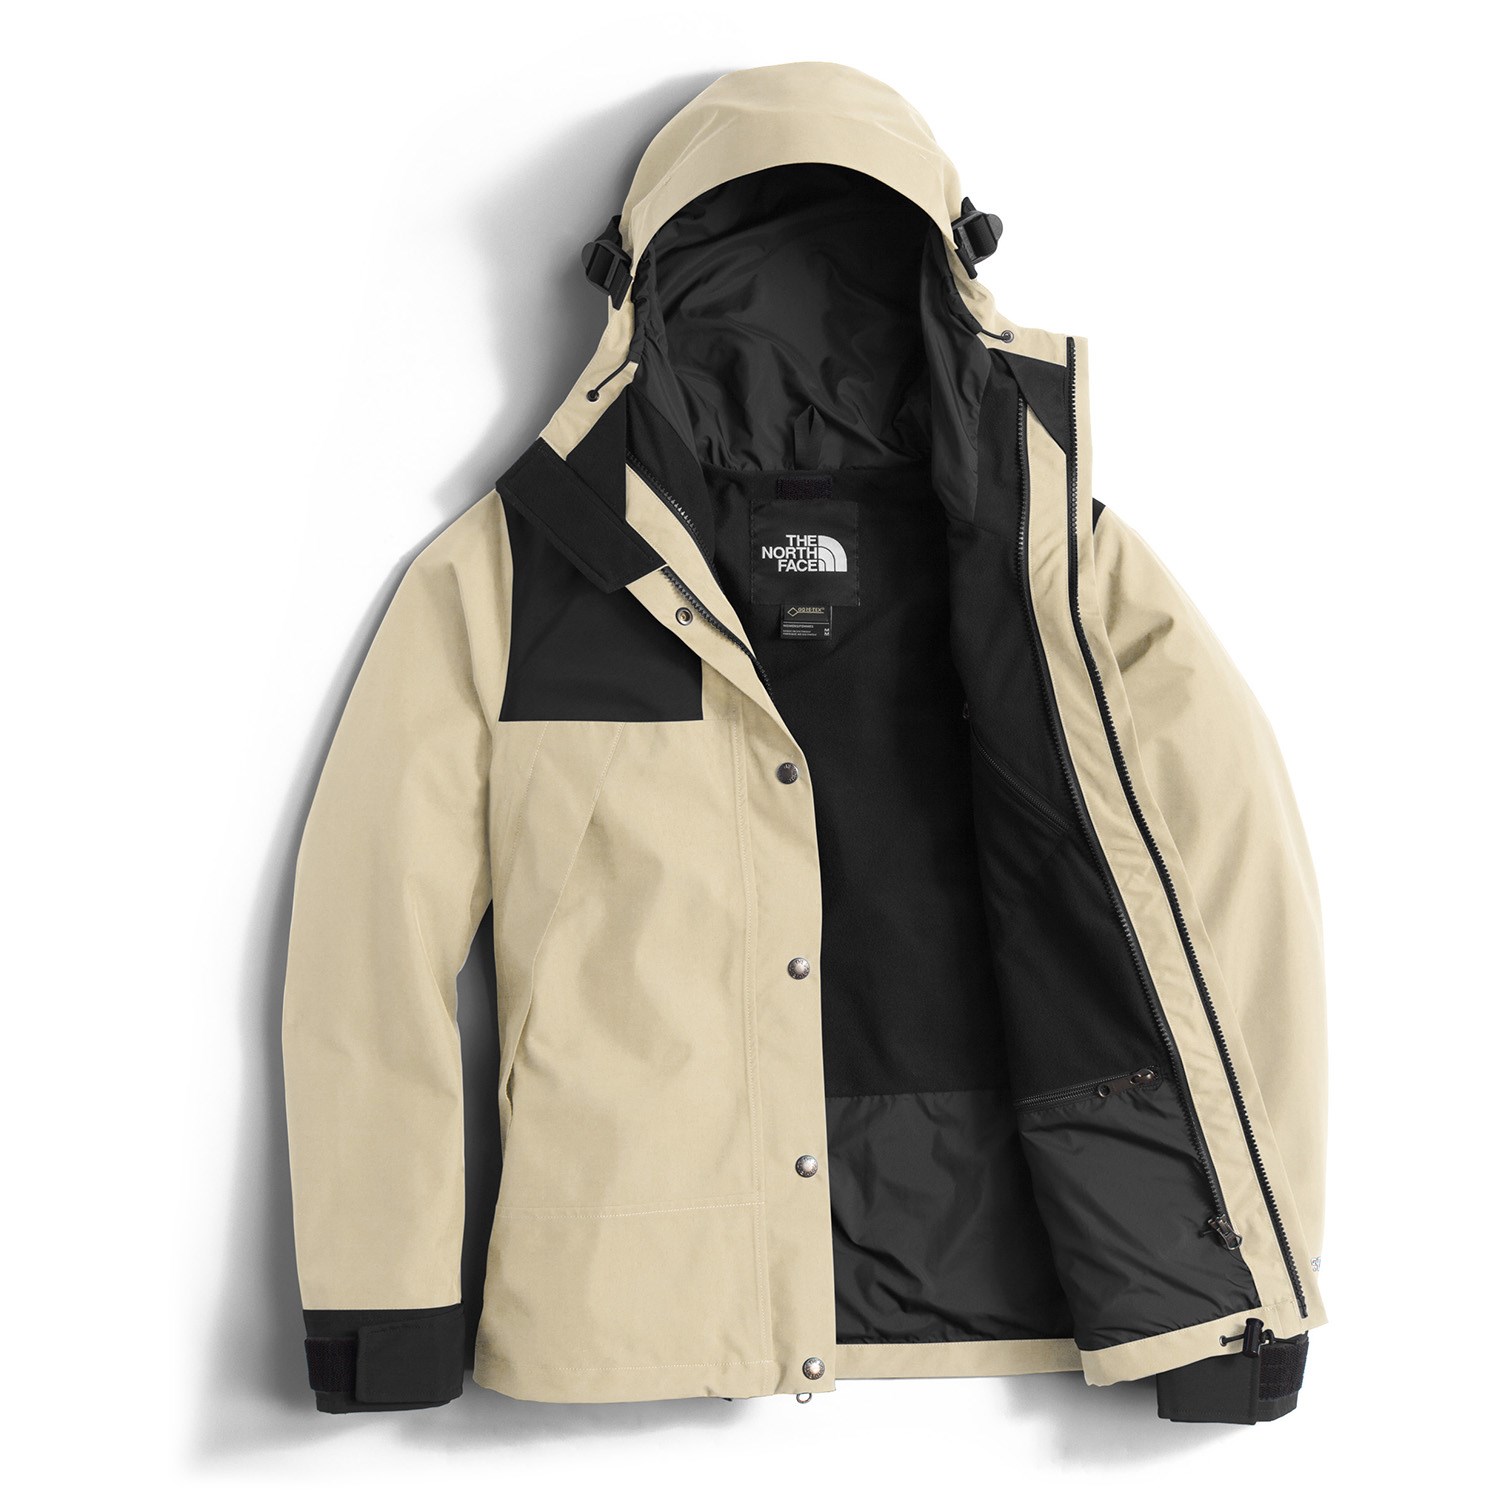 The North Face 1990 Mountain GORE-TEX® Jacket - Women's | evo